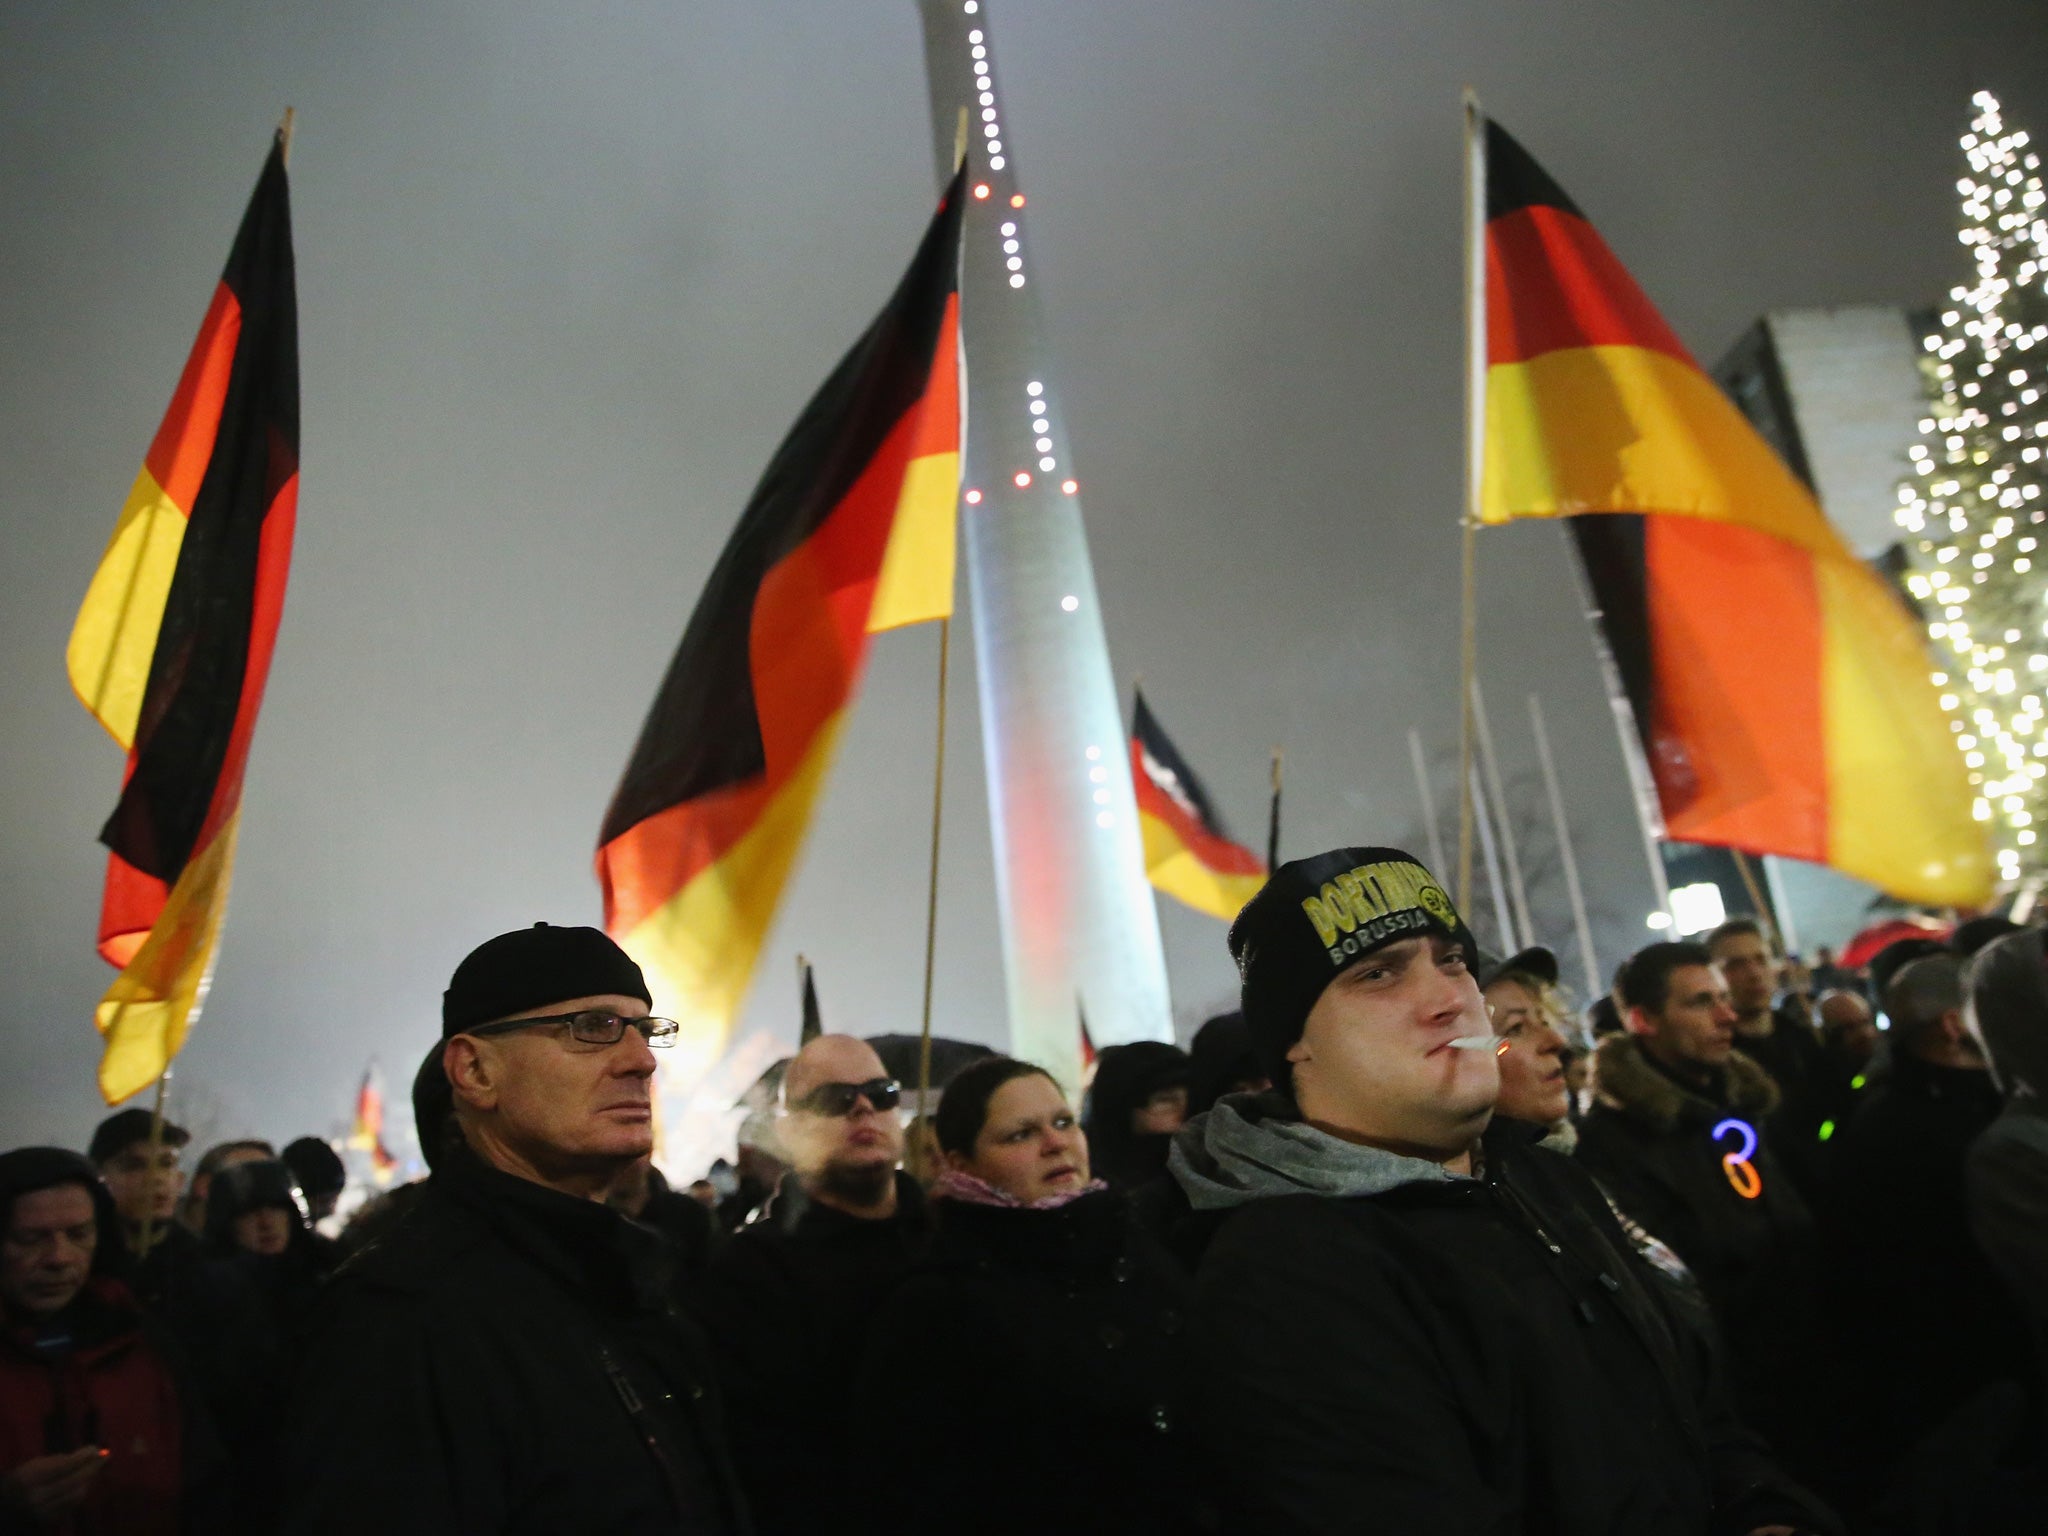 Supporters of the Pegida movement hold up German flags as they gather to protest on December 8, 2014 in Duesseldorf, Germany